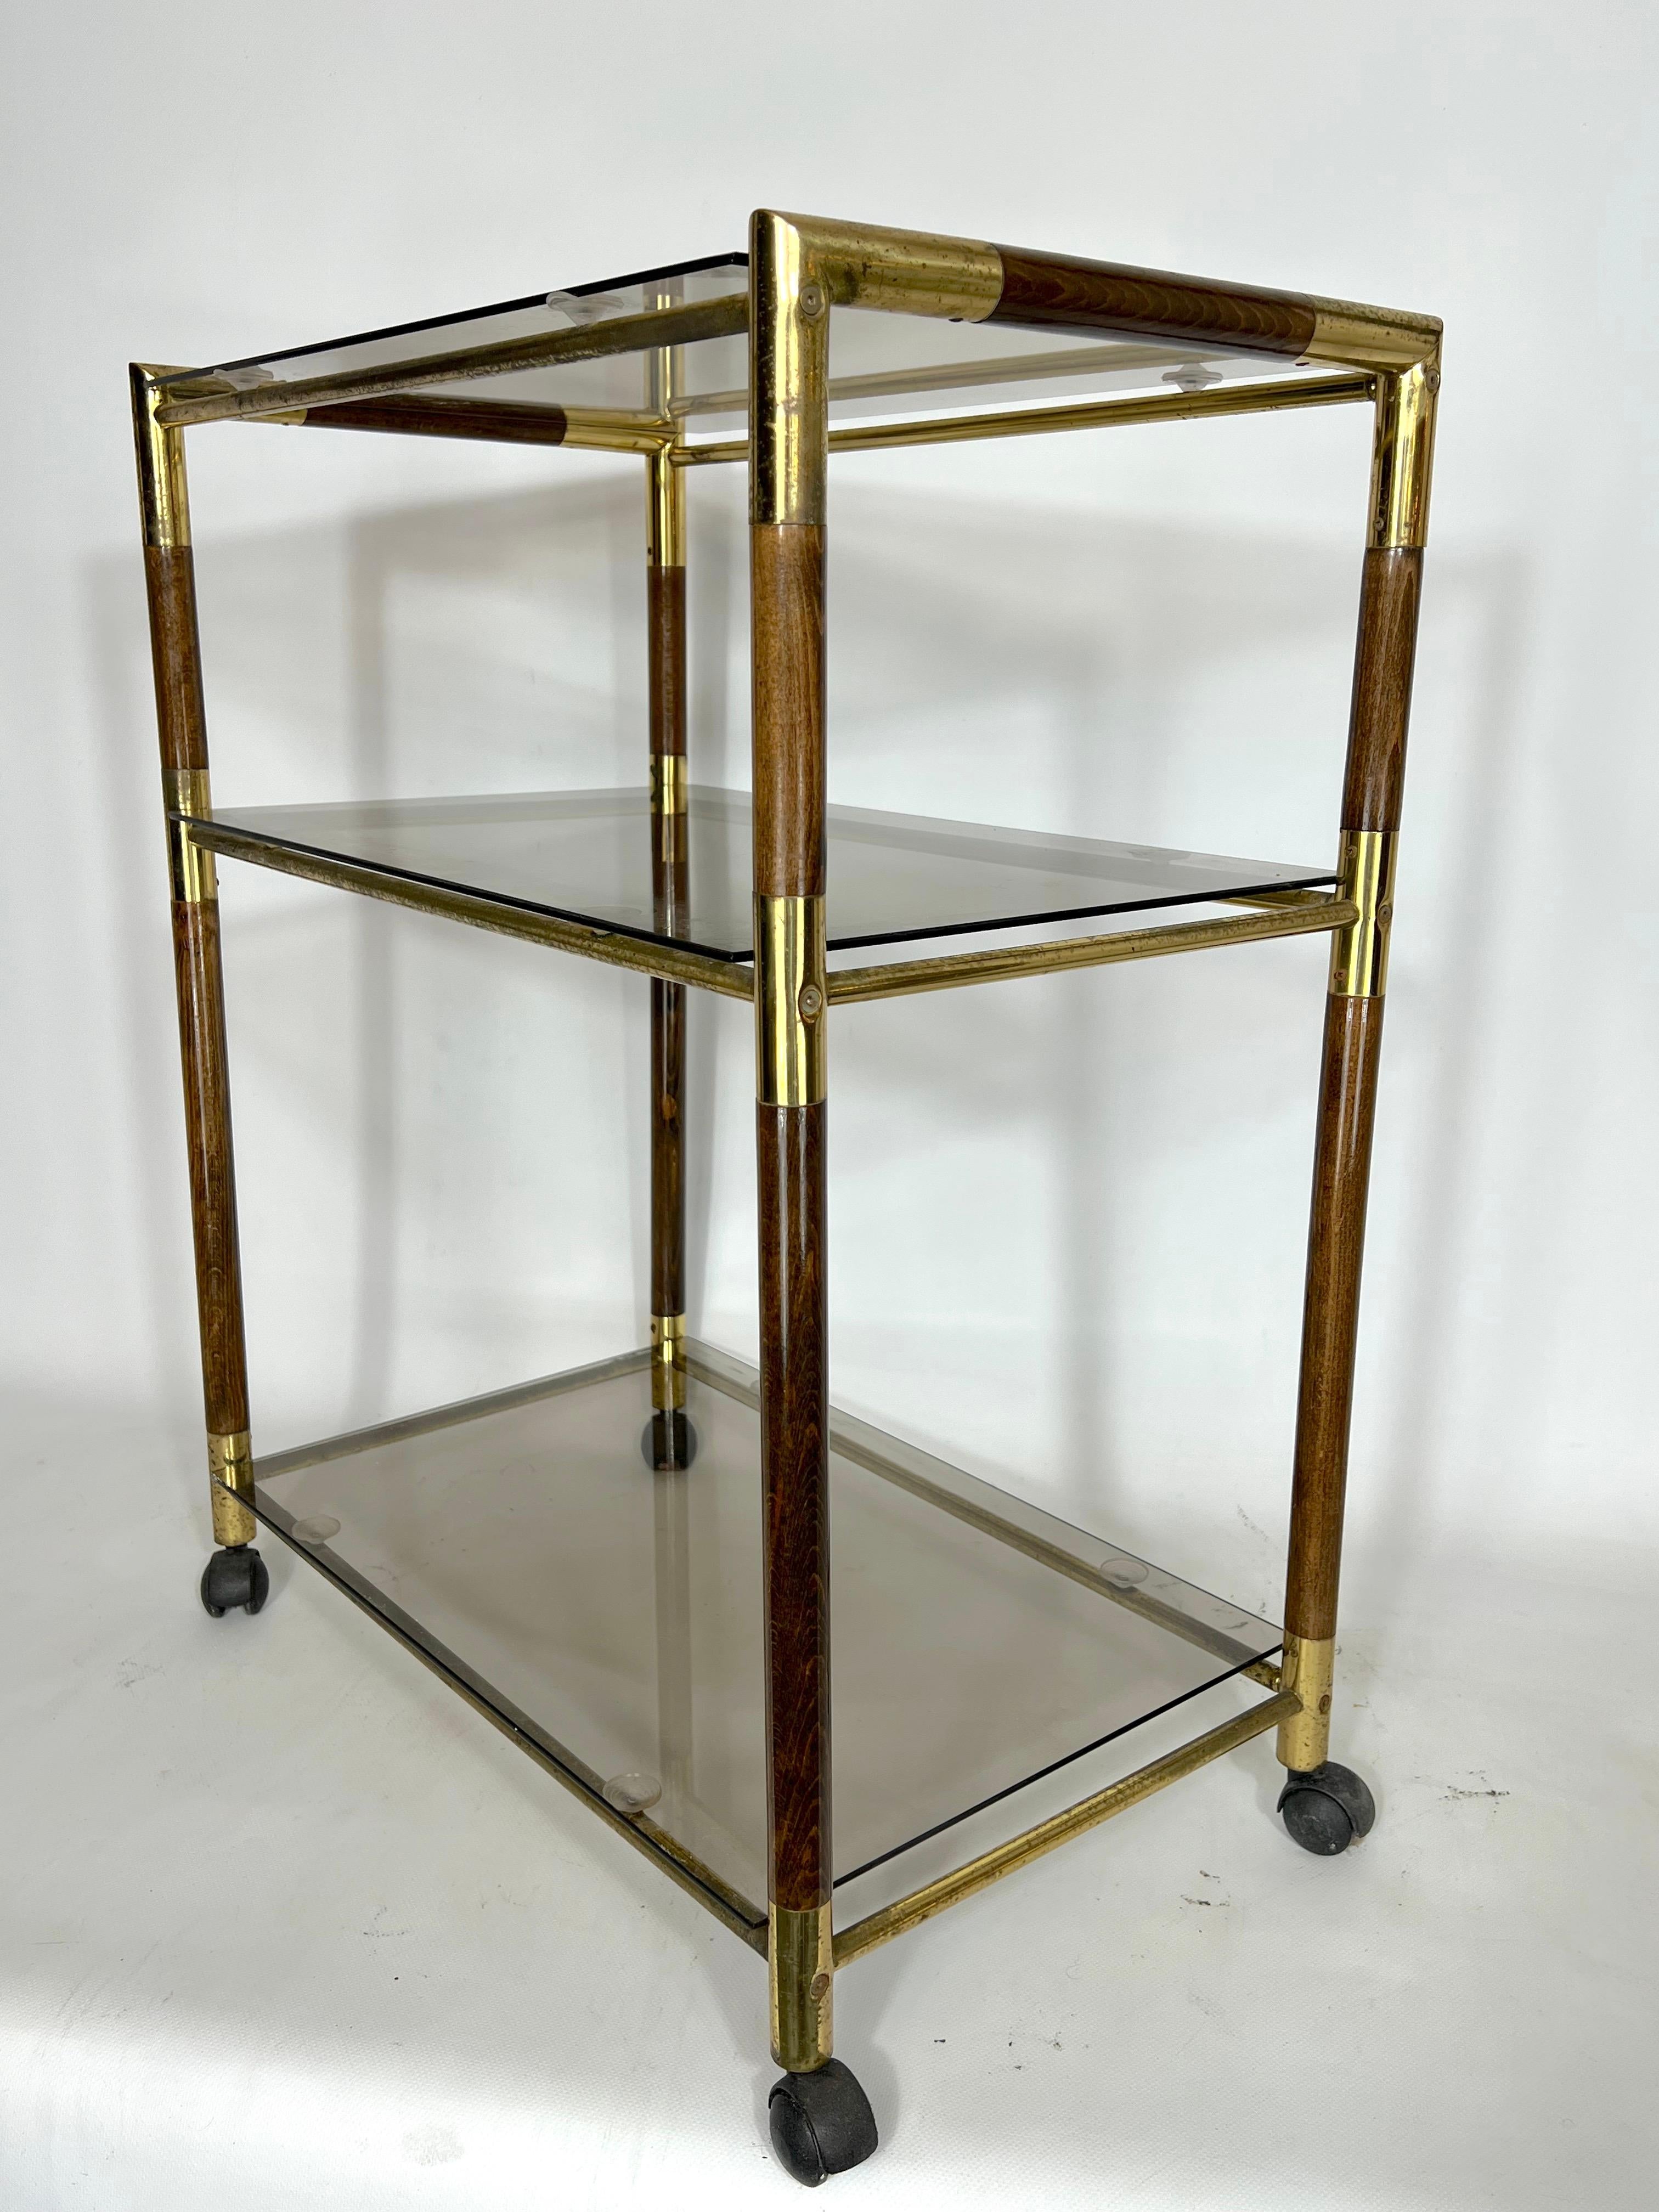 Vintage Three Shelves Brass and Wood Trolley or Bar Cart by Tommaso Barbi, 1970s For Sale 1